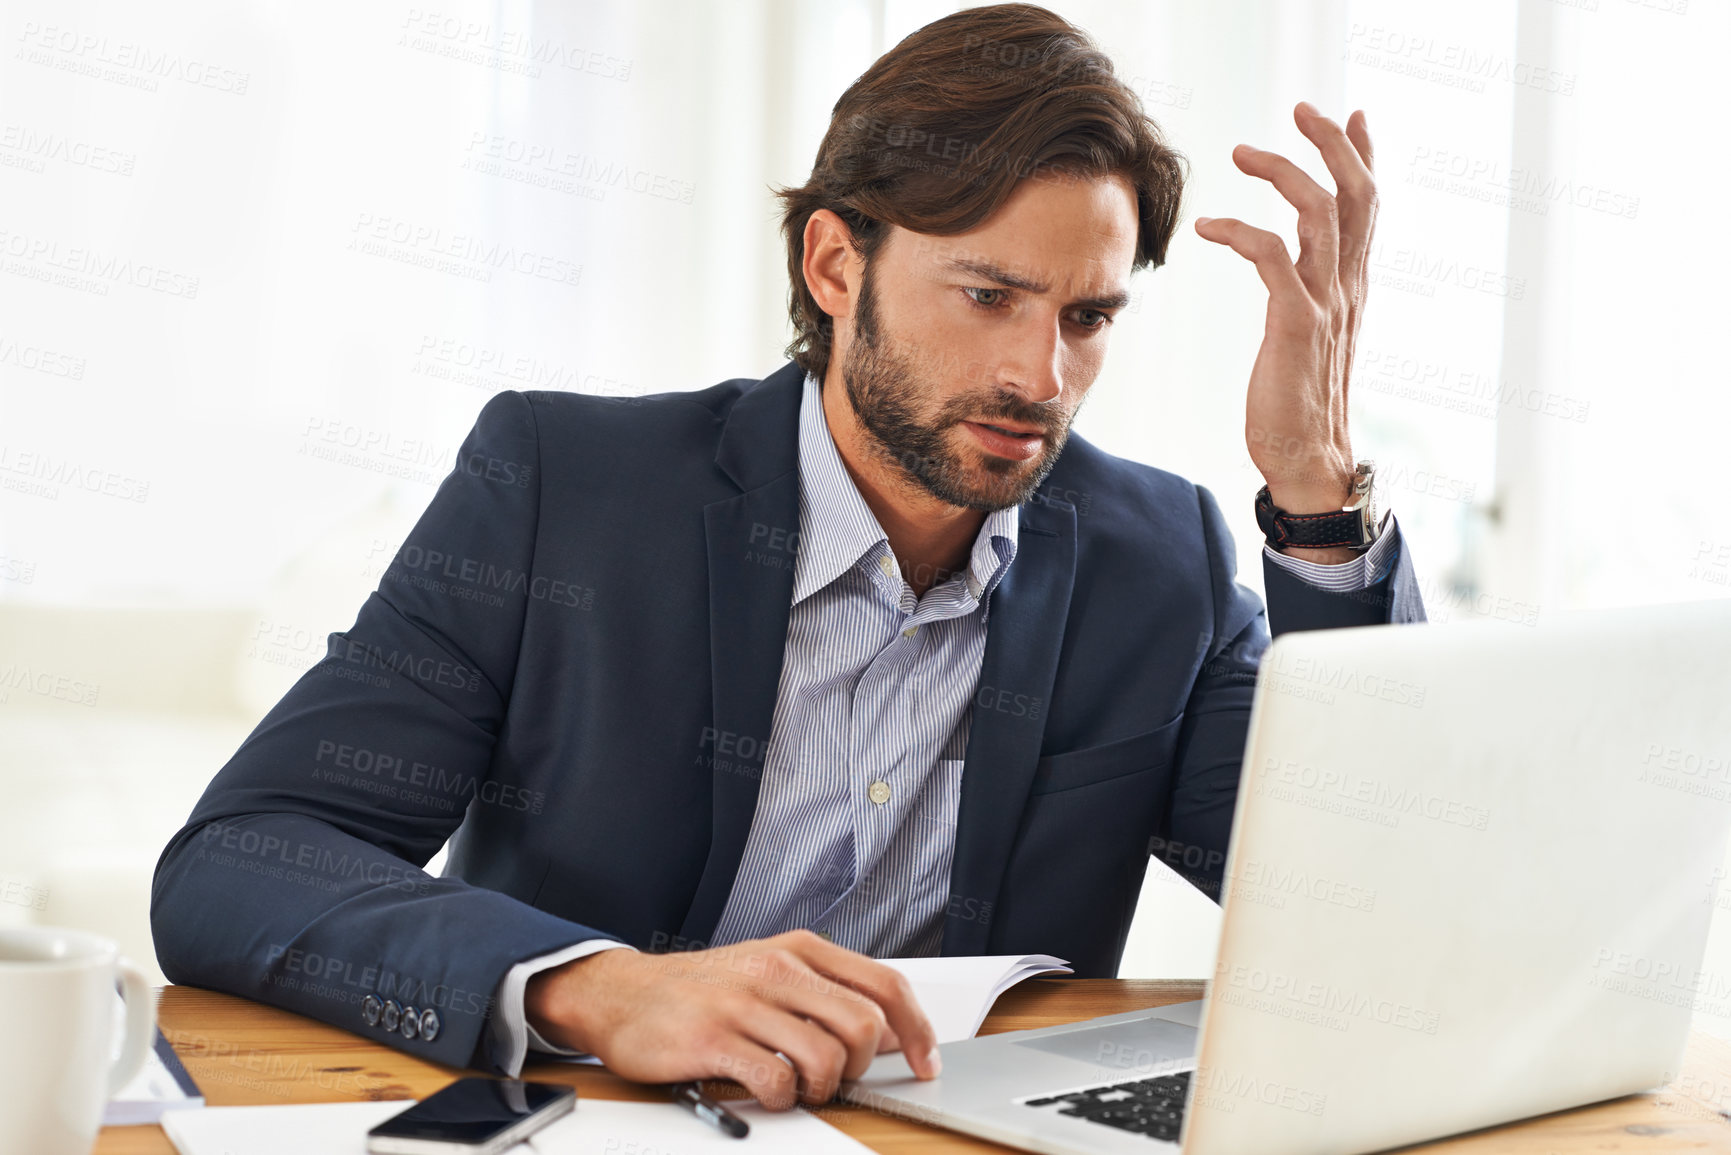 Buy stock photo A handsome businessman working on his laptop